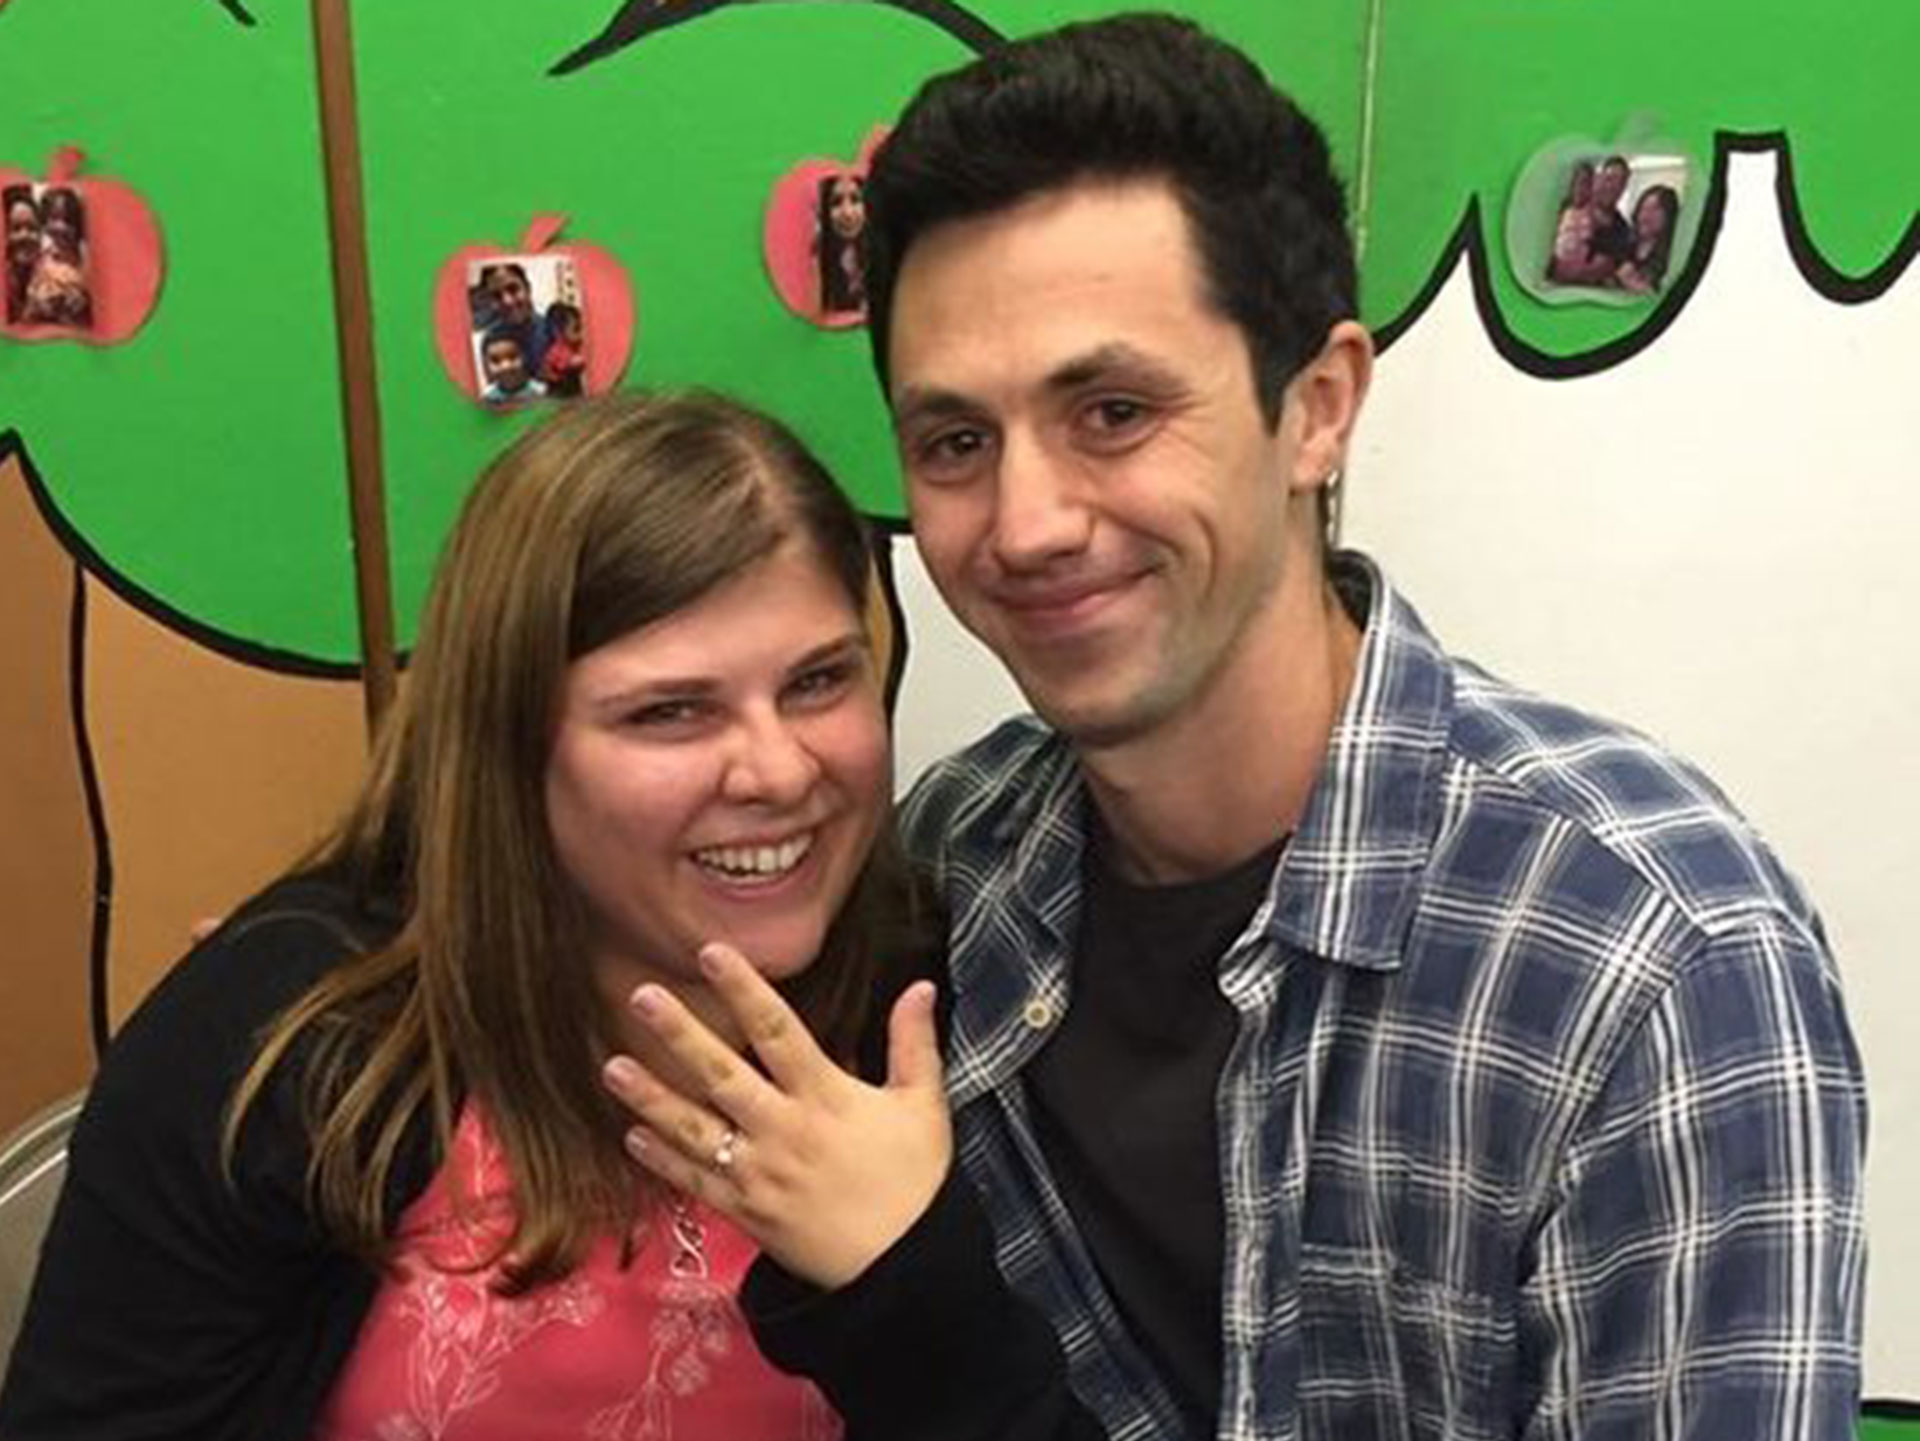 Eric Hernandez proposes with book to Melanie Goldsmith 